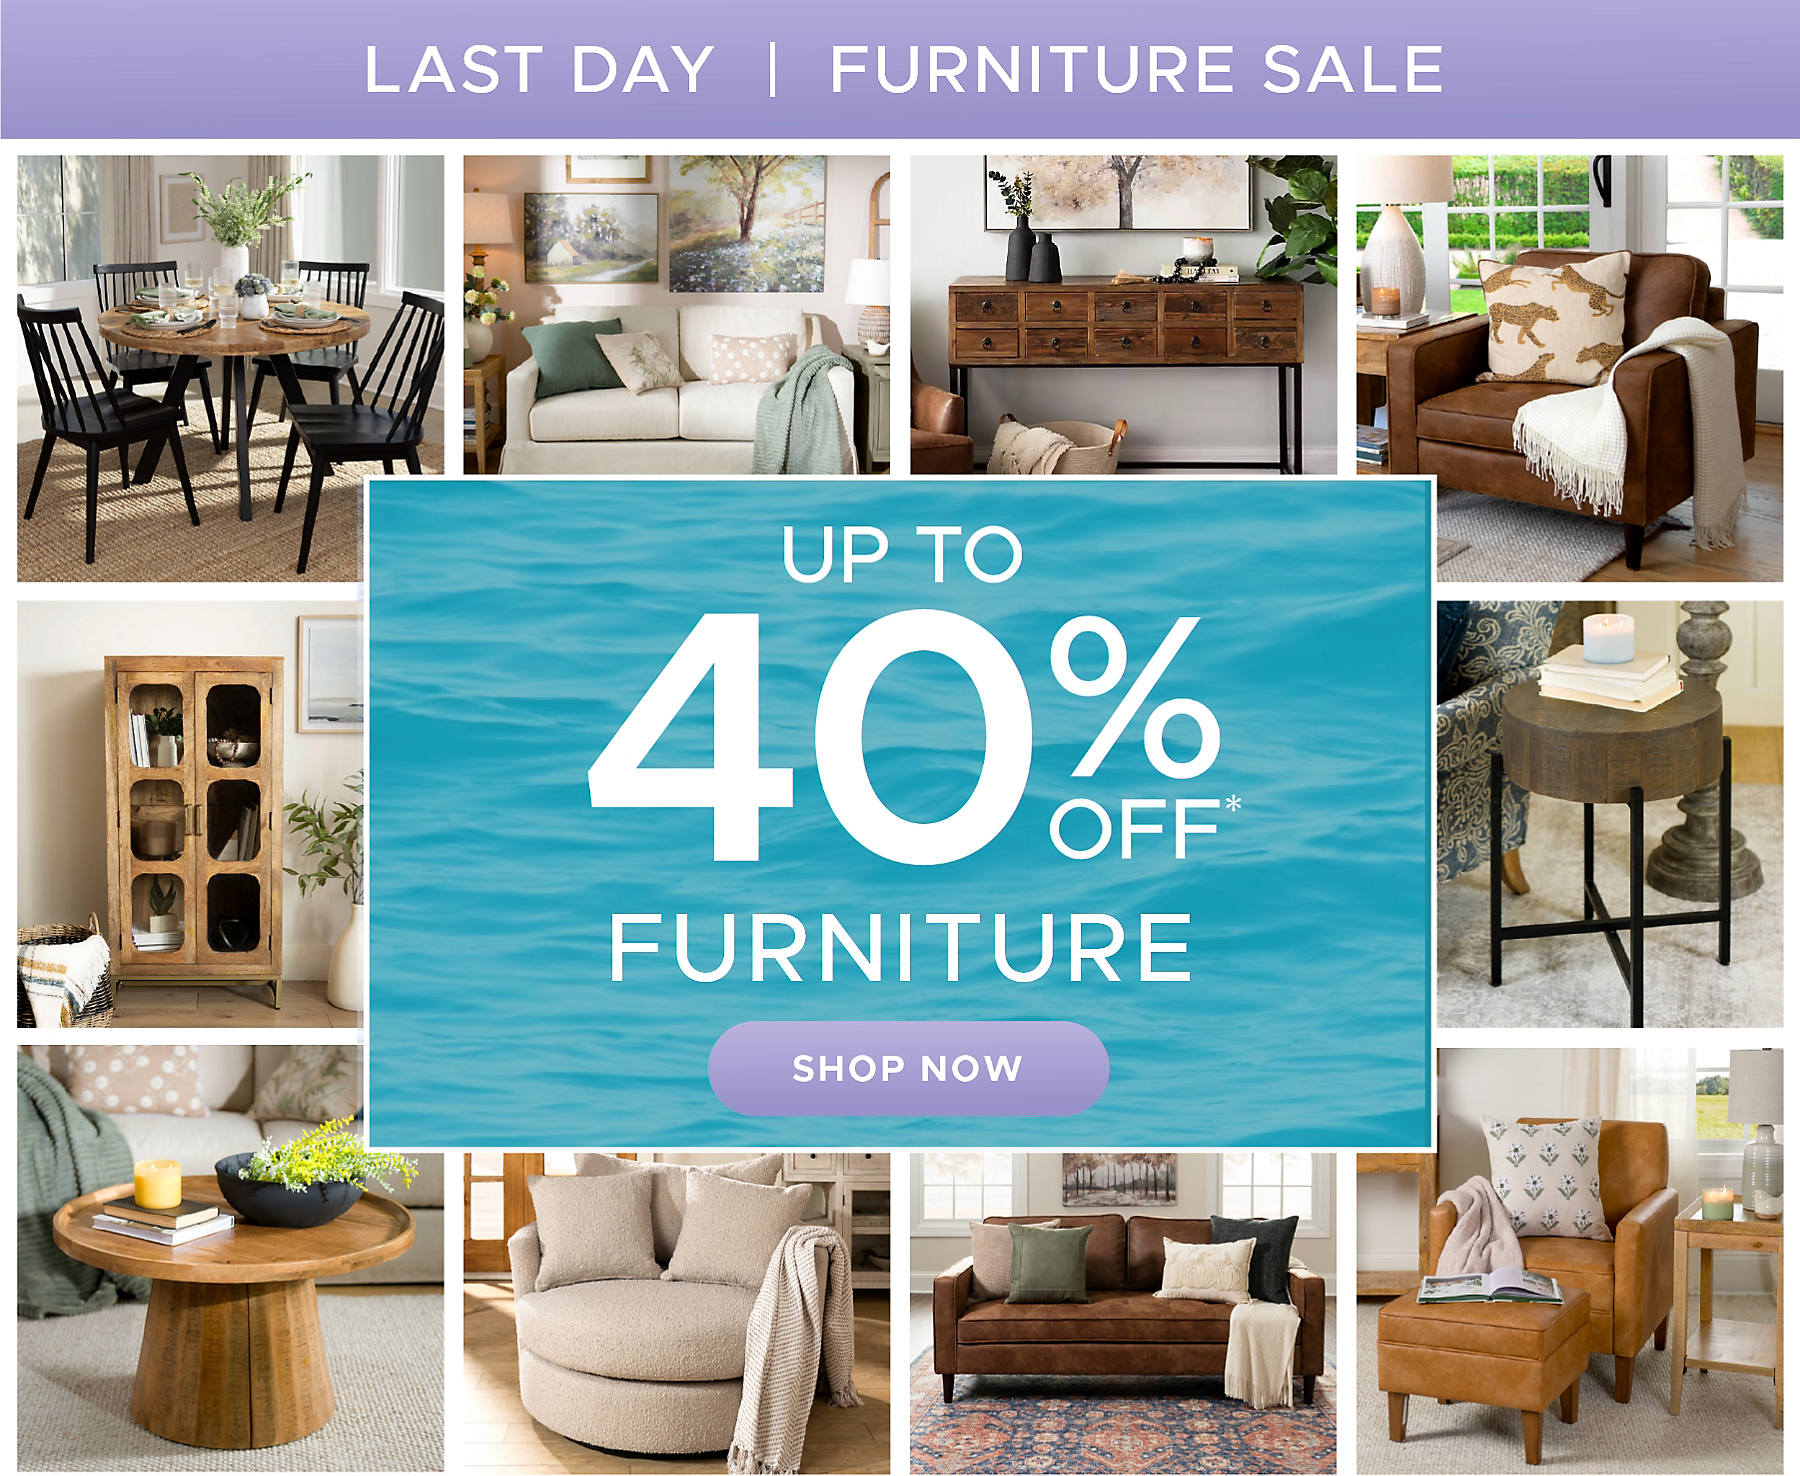 Last Day Furniture Sale up to 40% off* Furniture shop now